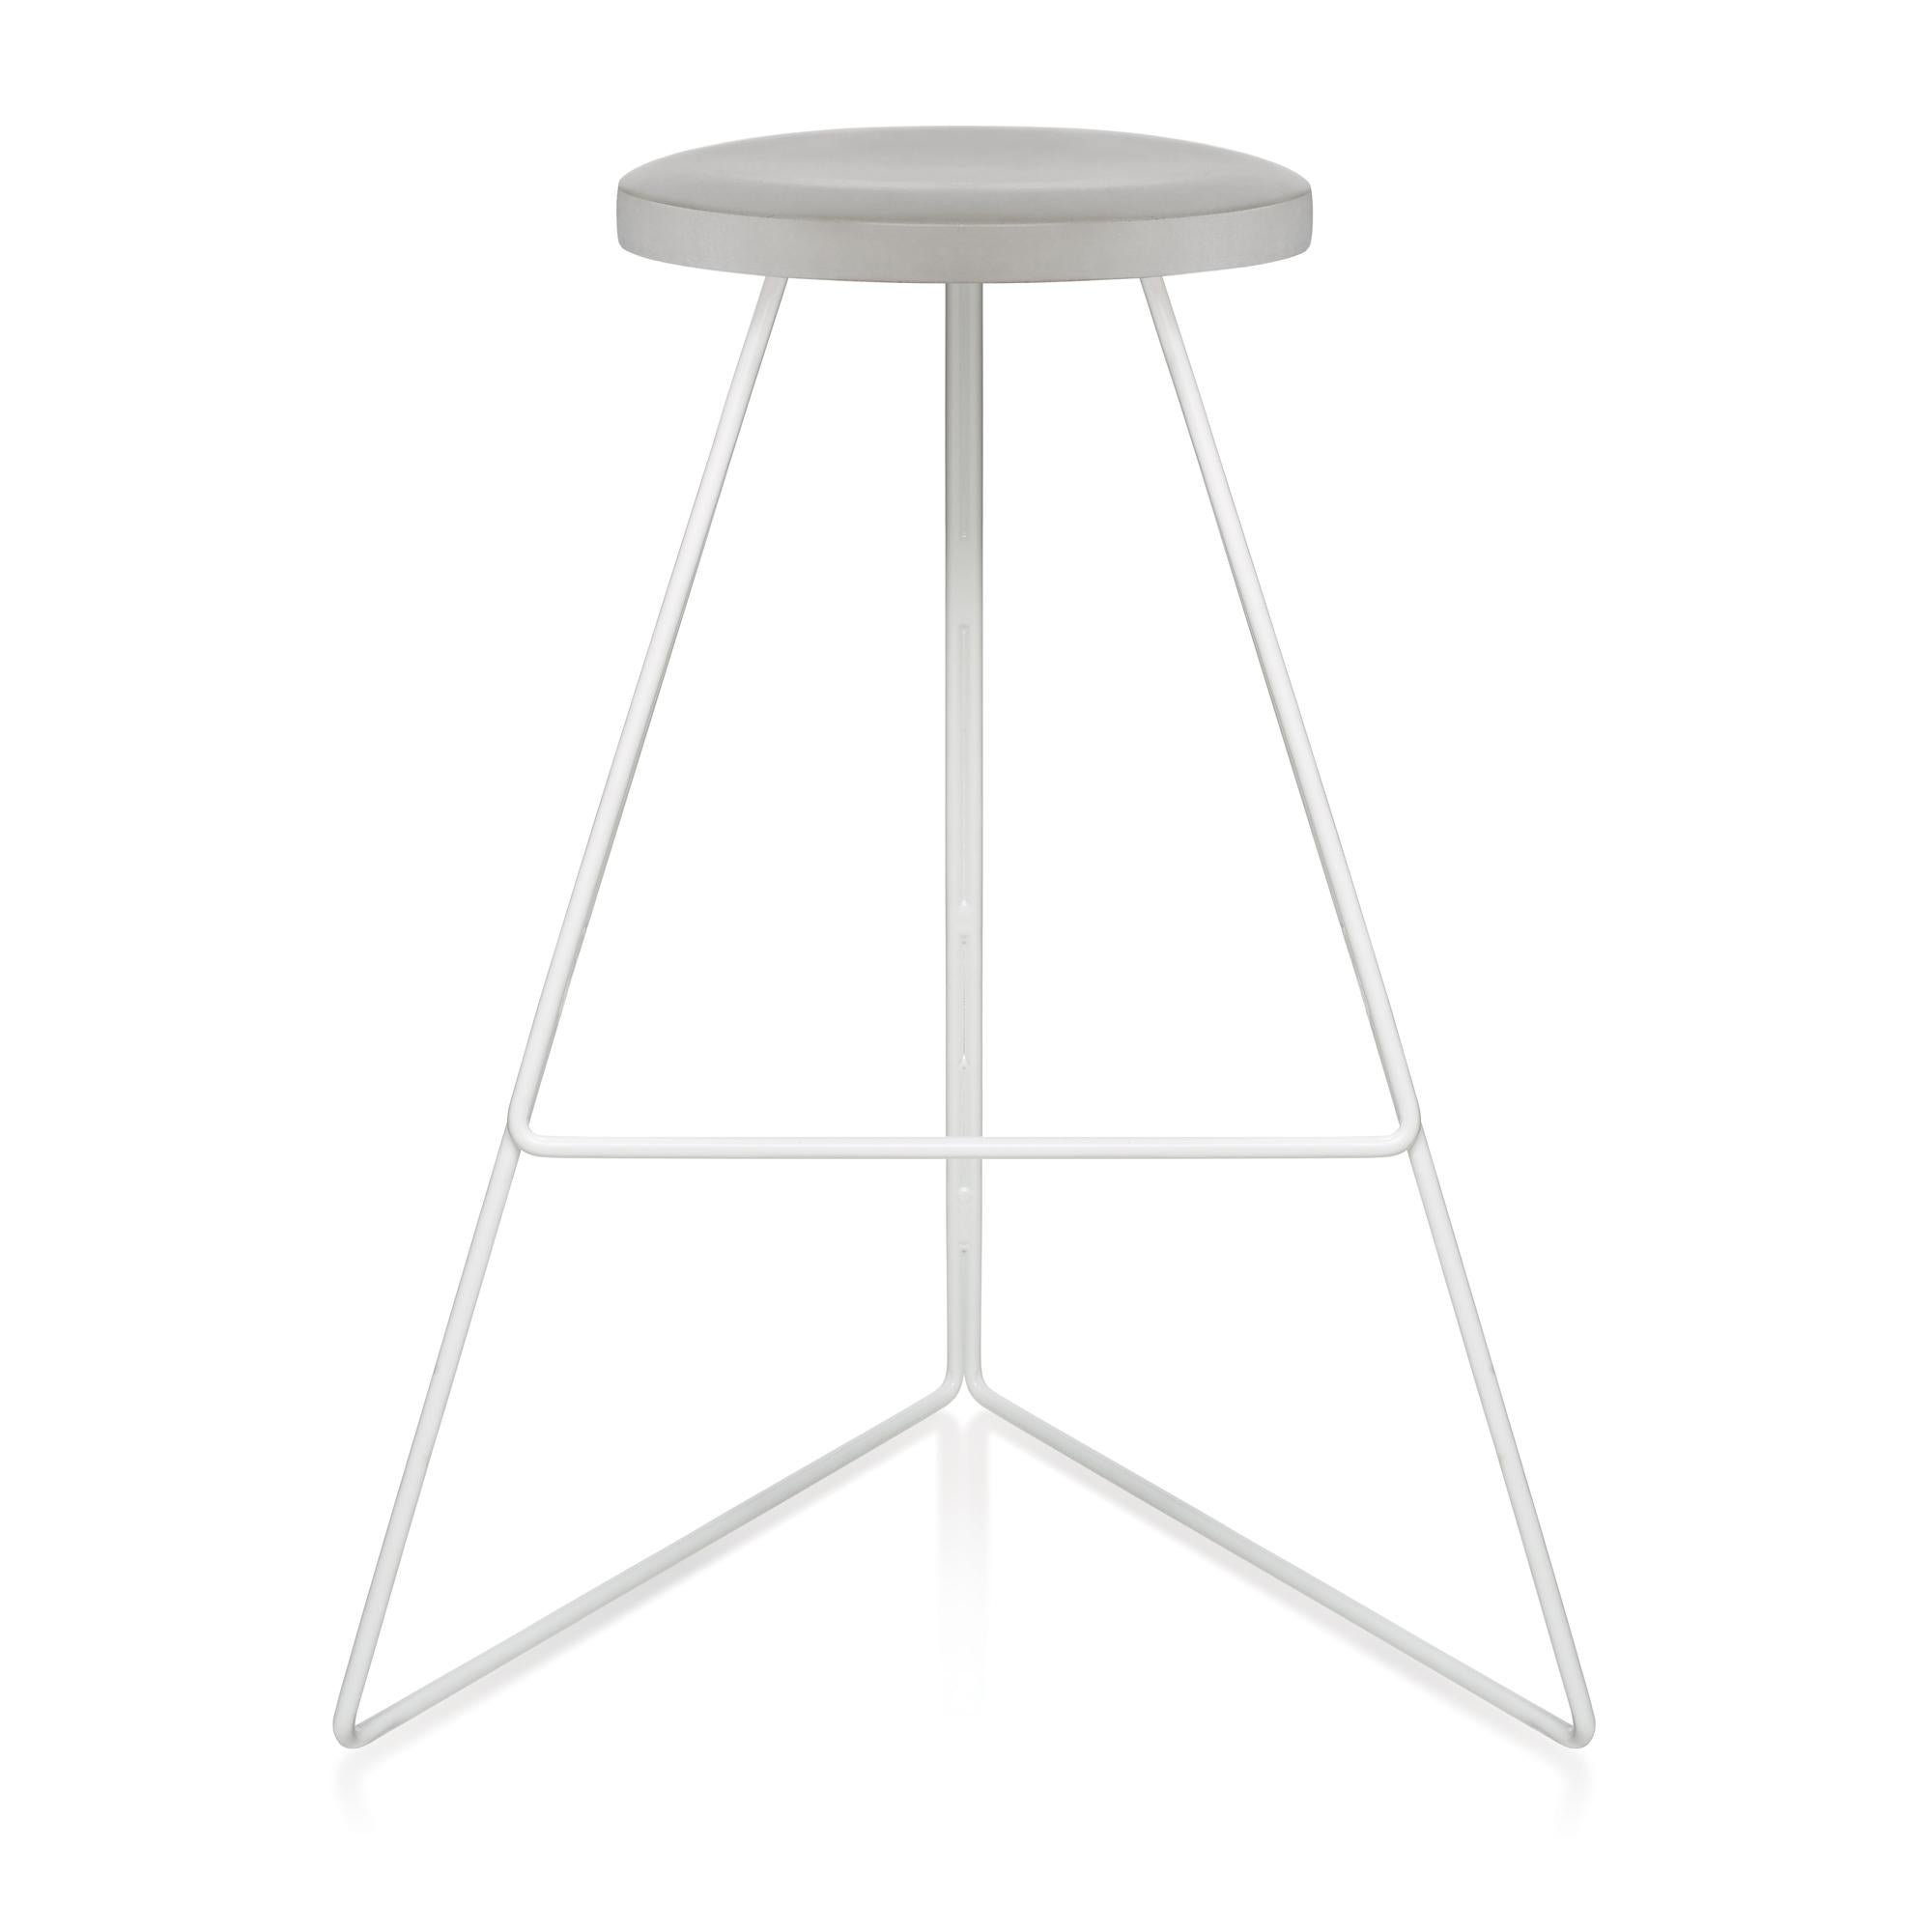 Modern Coleman Stool, White and Ecru, Counter Height For Sale